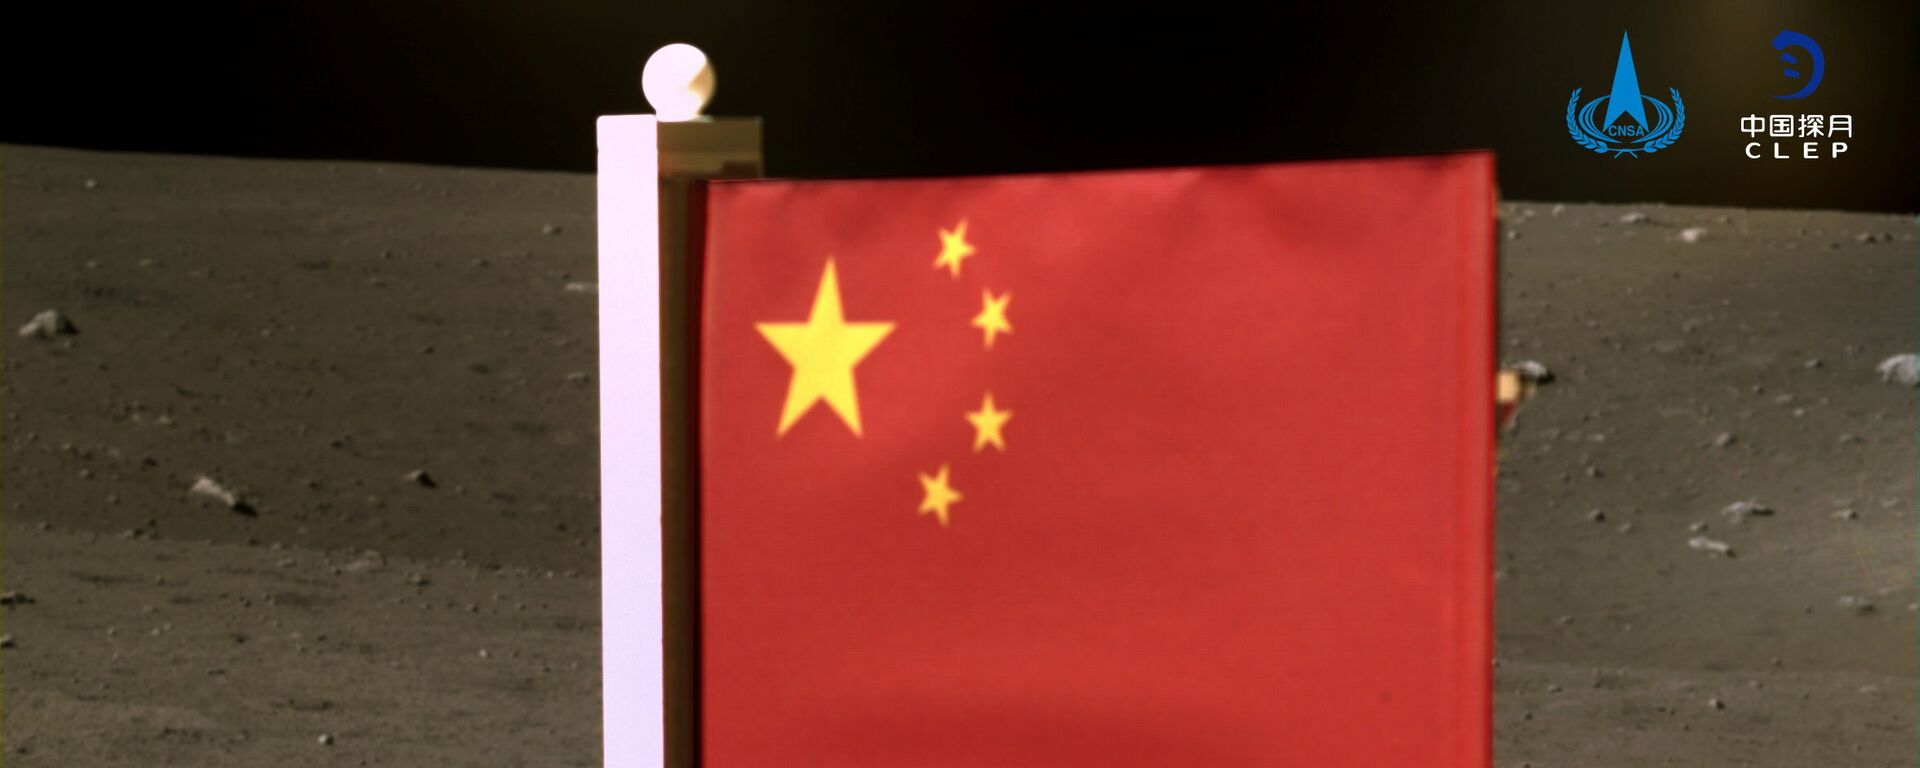 China's national flag is seen unfurled from the Chang'e-5 spacecraft on the moon, in this handout image provided by China National Space Administration (CNSA) December 4, 2020.  - Sputnik International, 1920, 16.12.2020